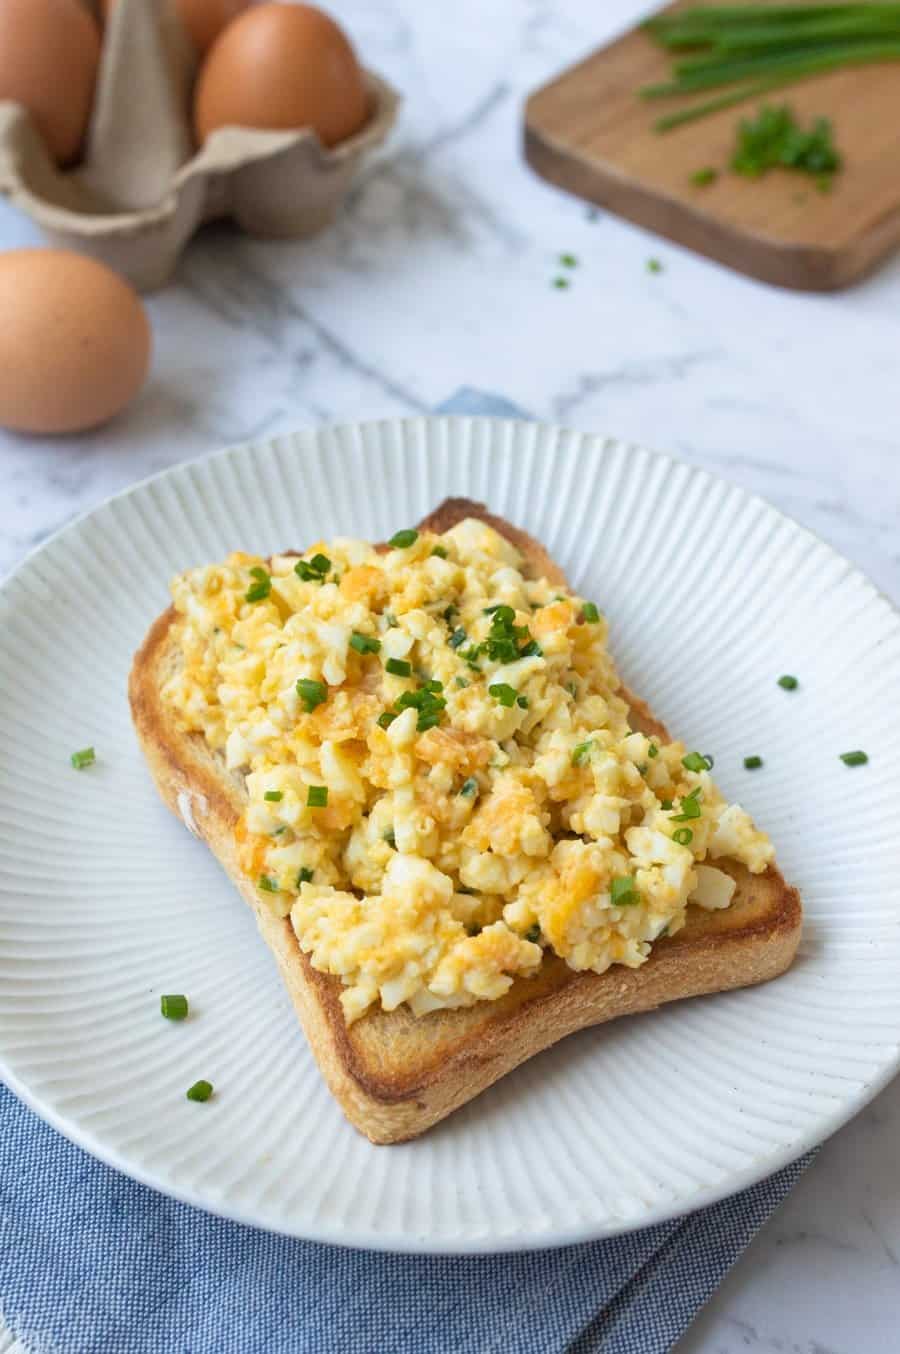 white plate in foreground with piece of toast topped with smashed eggs and garnished with chives.